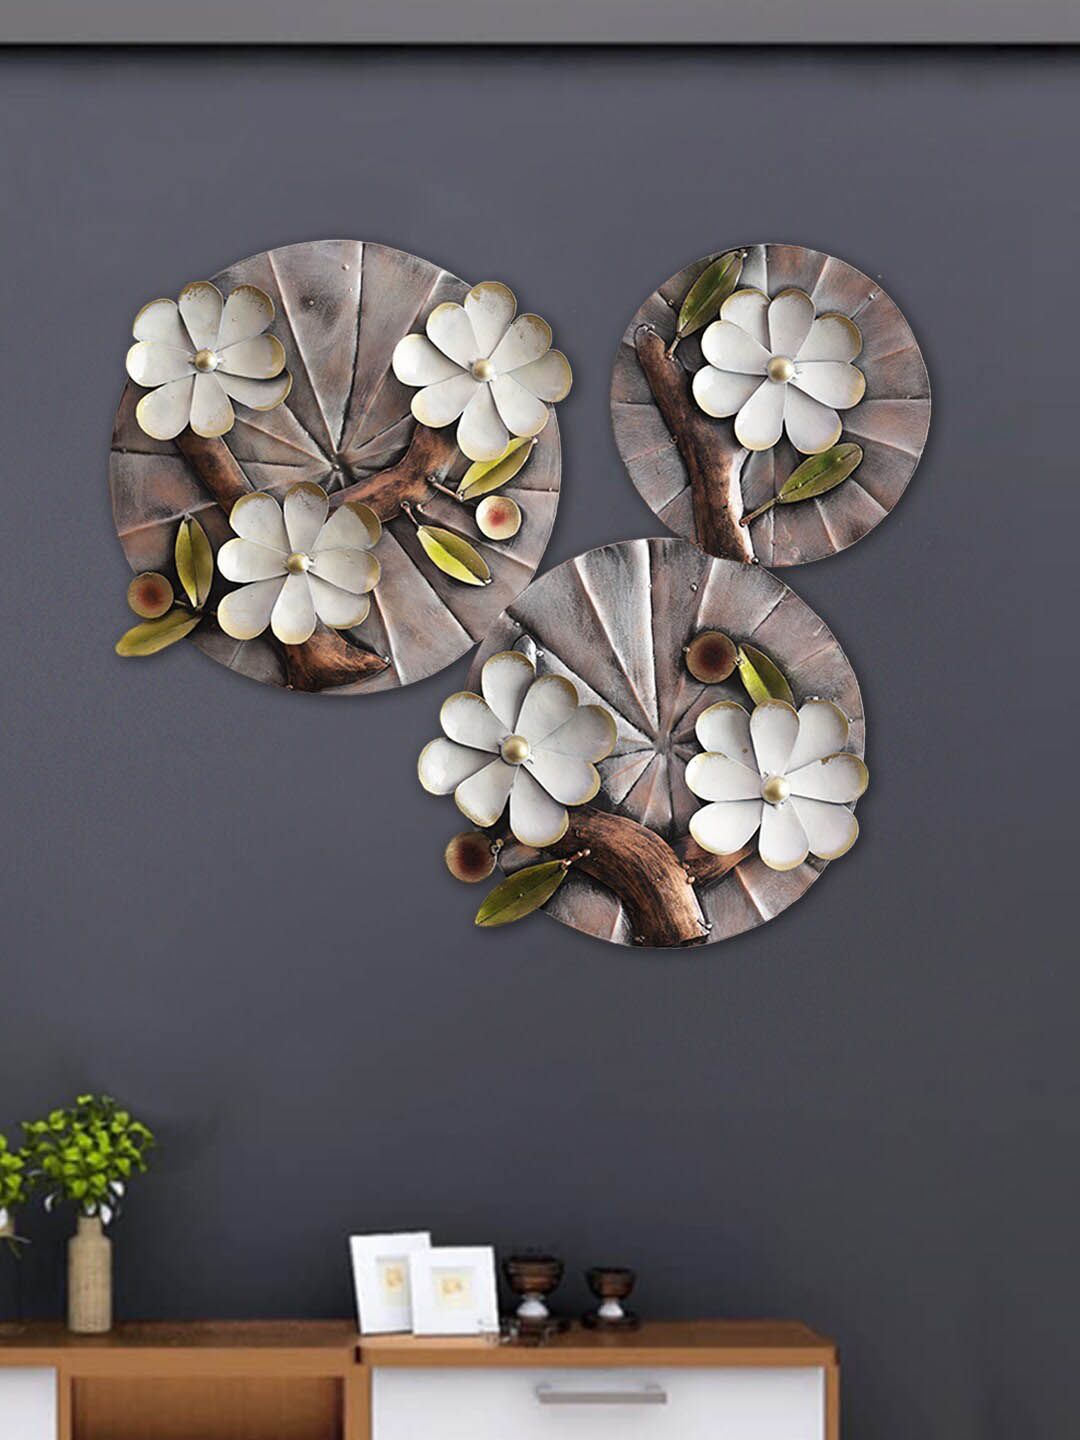 Aapno Rajasthan Set Of 3 Disc Shaped Wall Decor Price in India